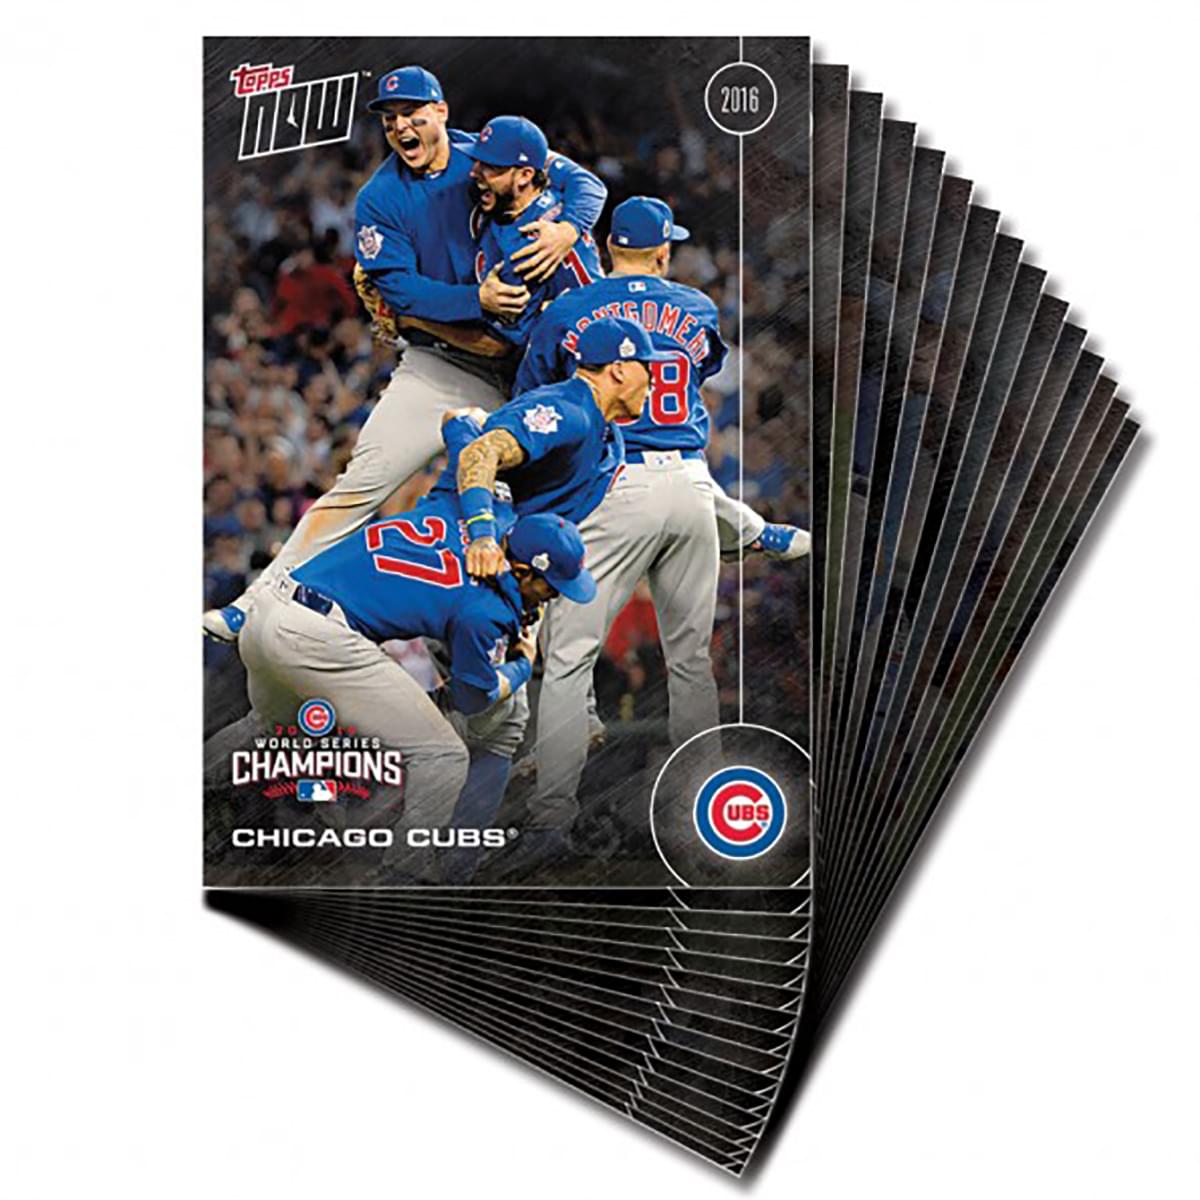 MLB Chicago Cubs 2016 World Series Championship Topps Trading Card Set